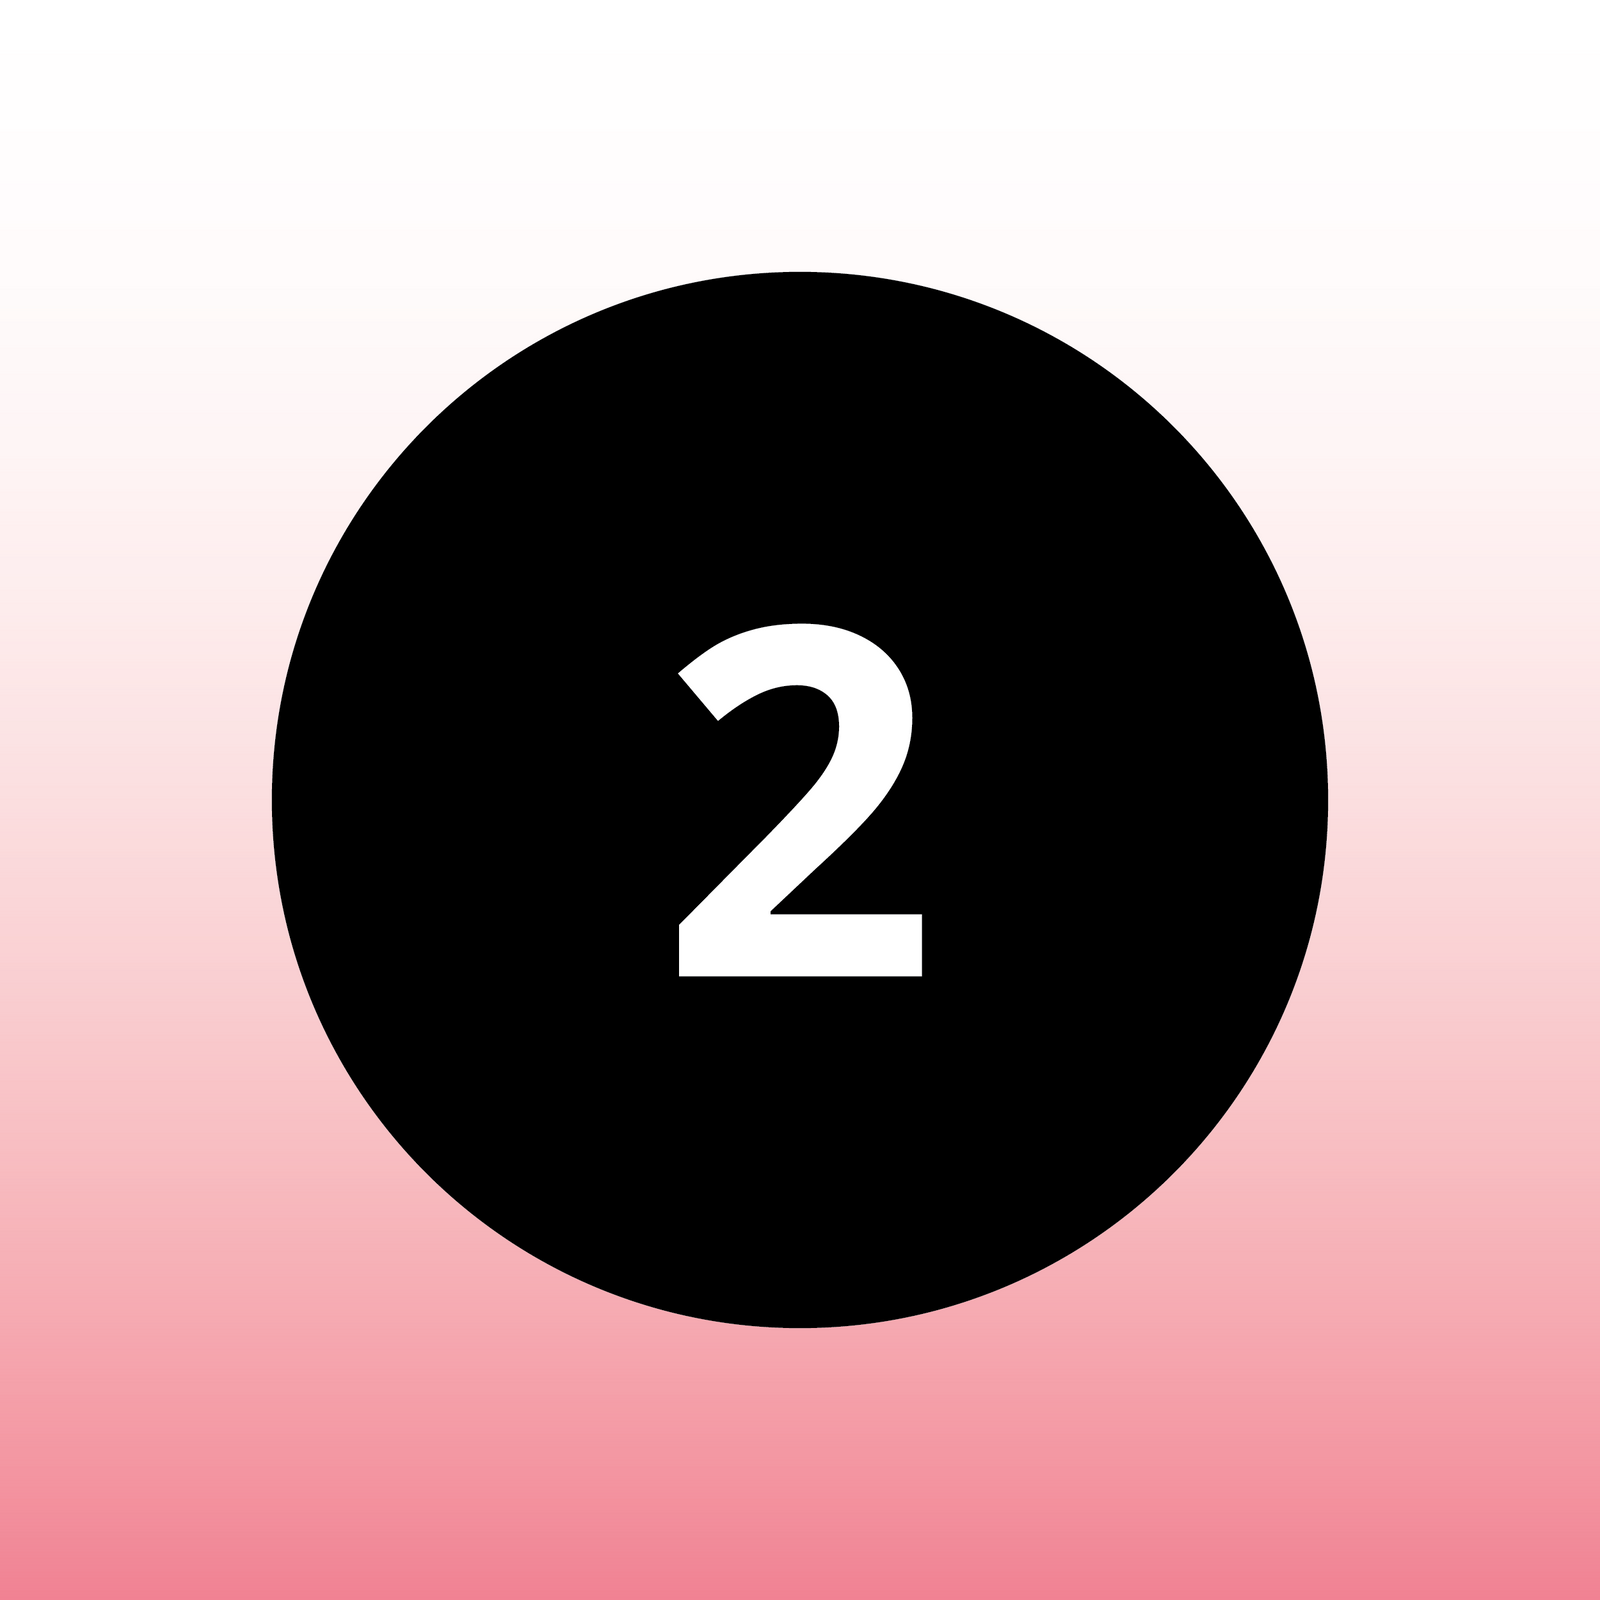 Number 2 with a black circle and a pink gradient.